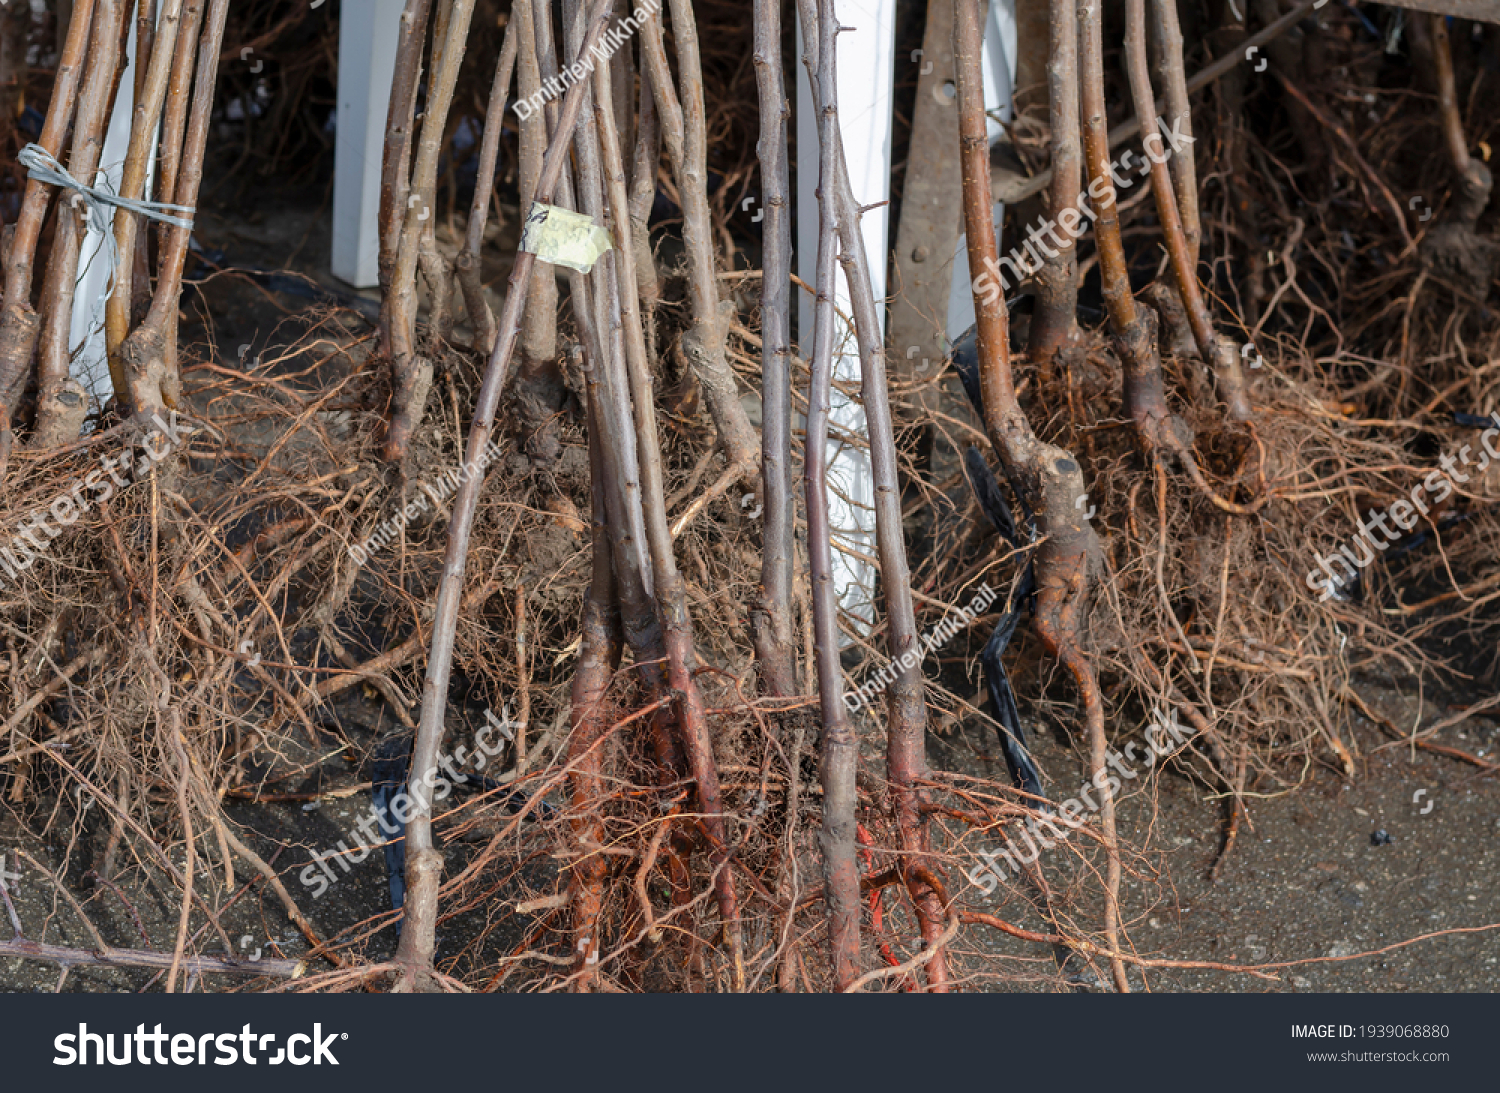 Saplings of fruit trees with soil covered roots. Sale of young trees for planting at the farmers' market. Bare rooted trees. #1939068880